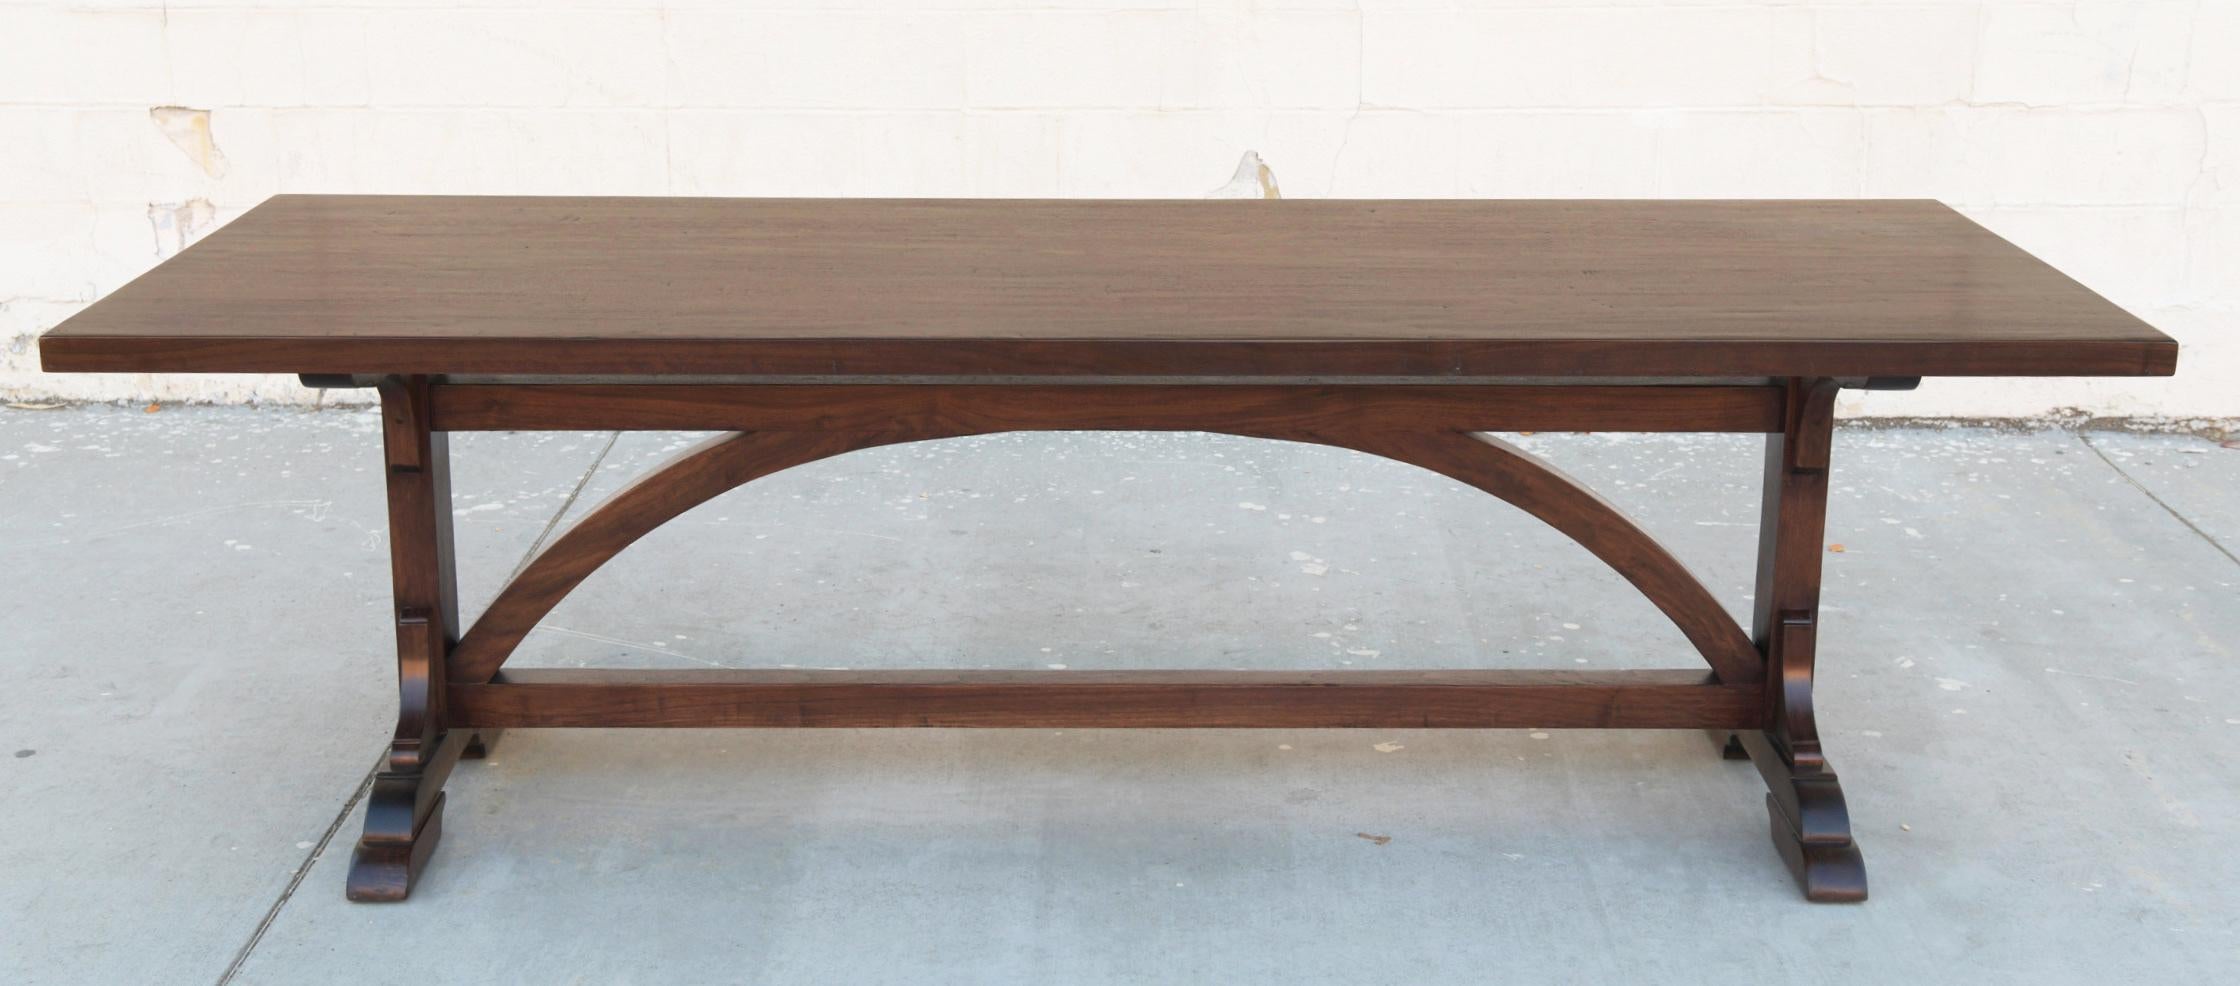 This walnut console dining table is seen here in 110